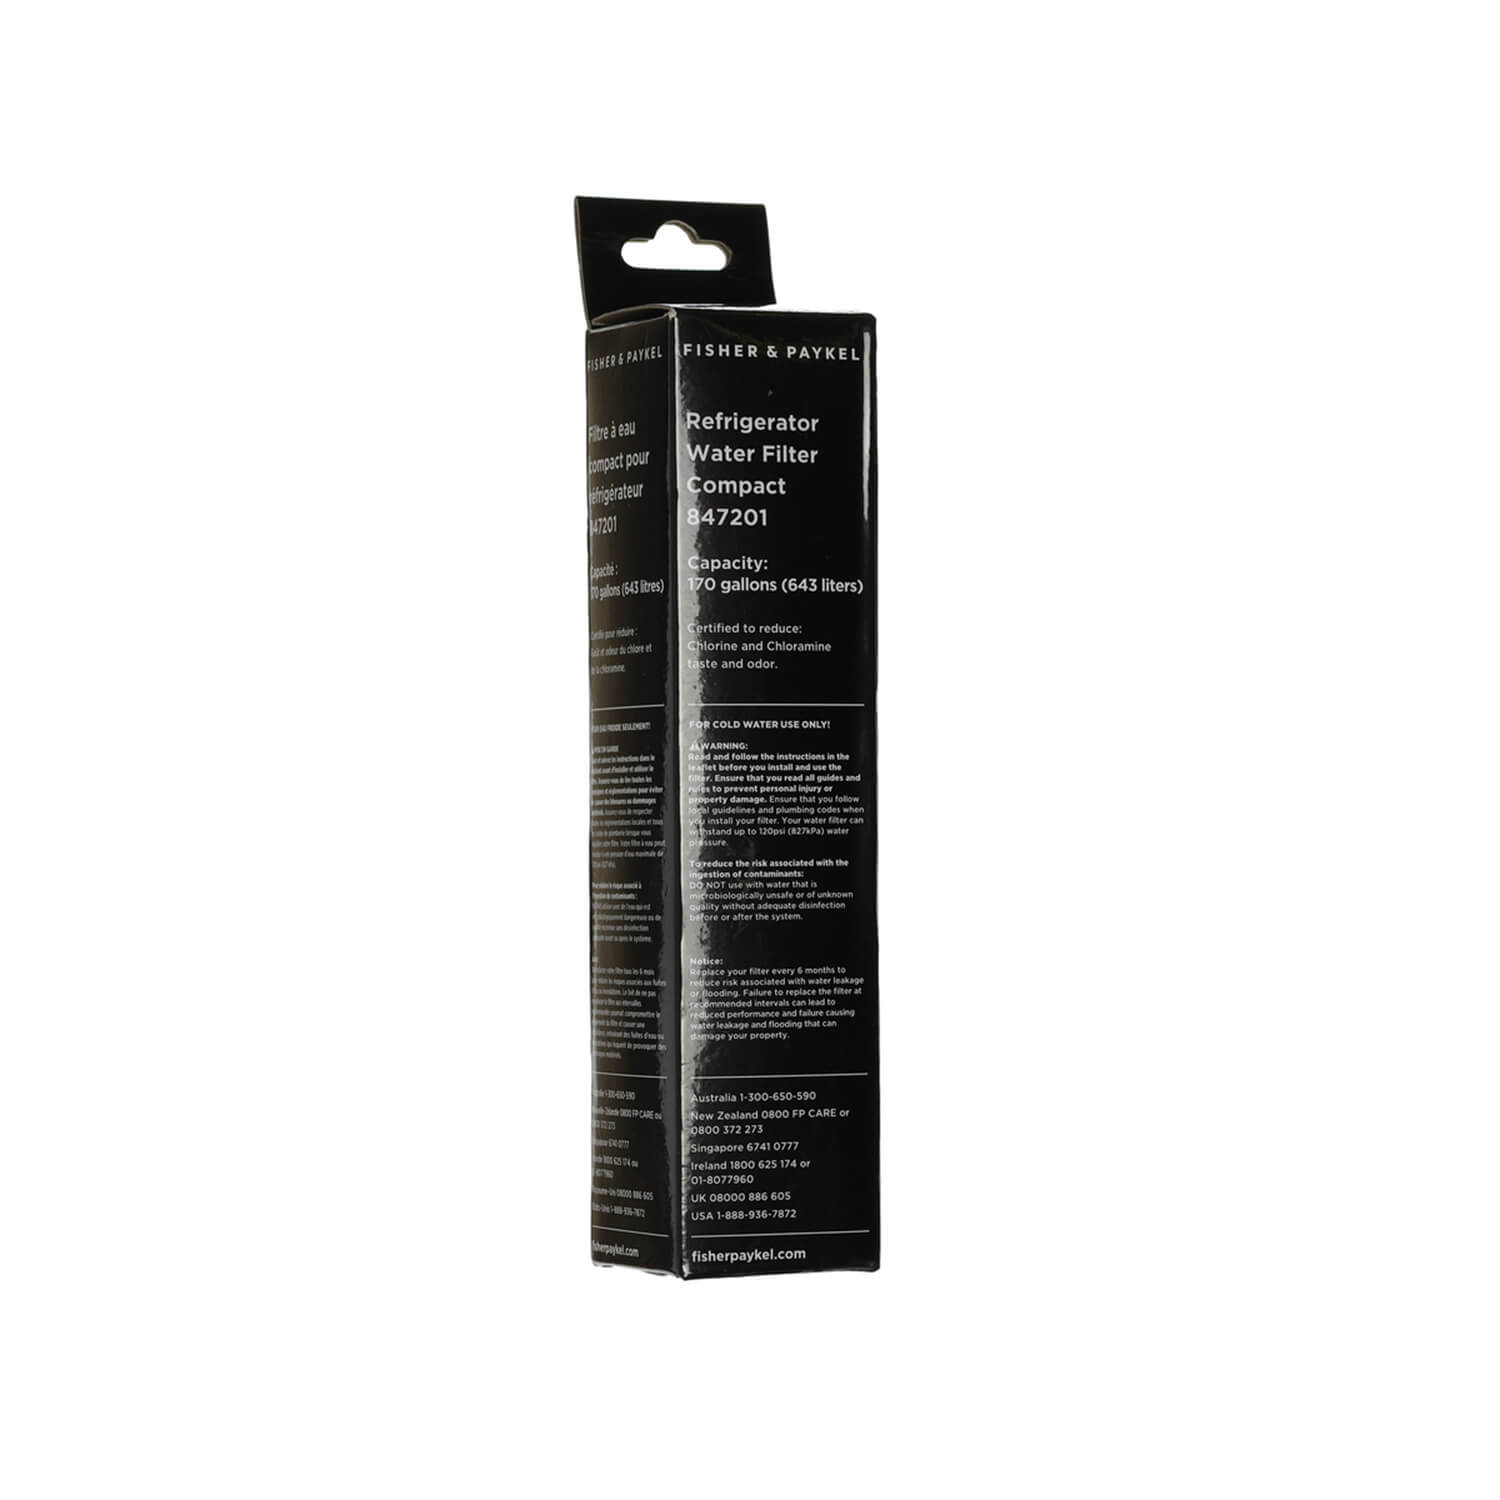 Fisher Paykel 847201 Refrigerator Water Filter